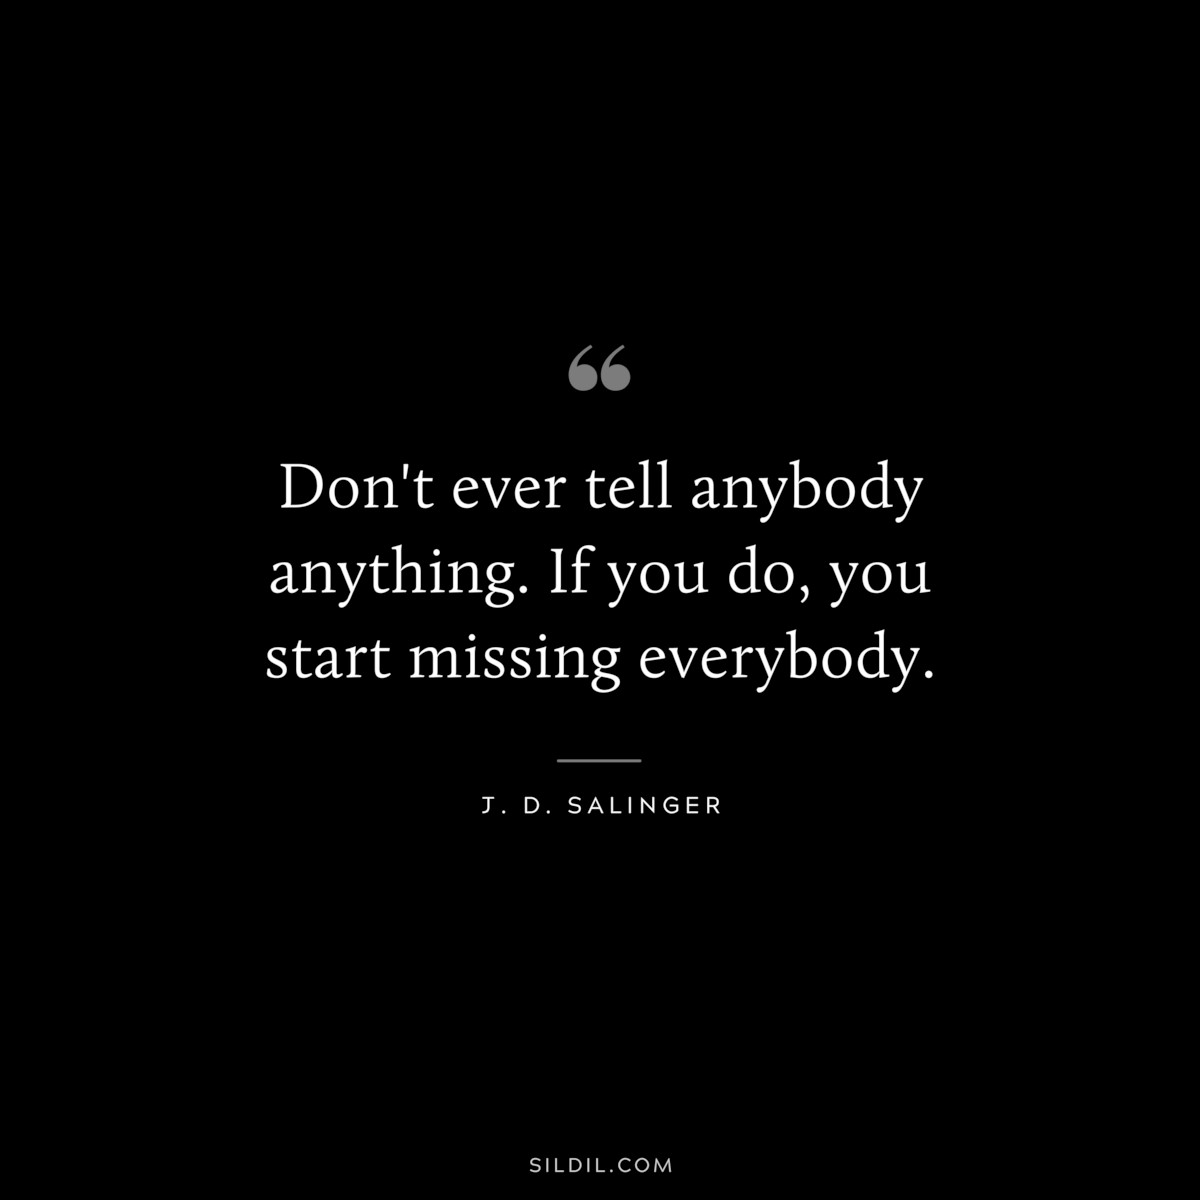 Don't ever tell anybody anything. If you do, you start missing everybody. — J. D. Salinger